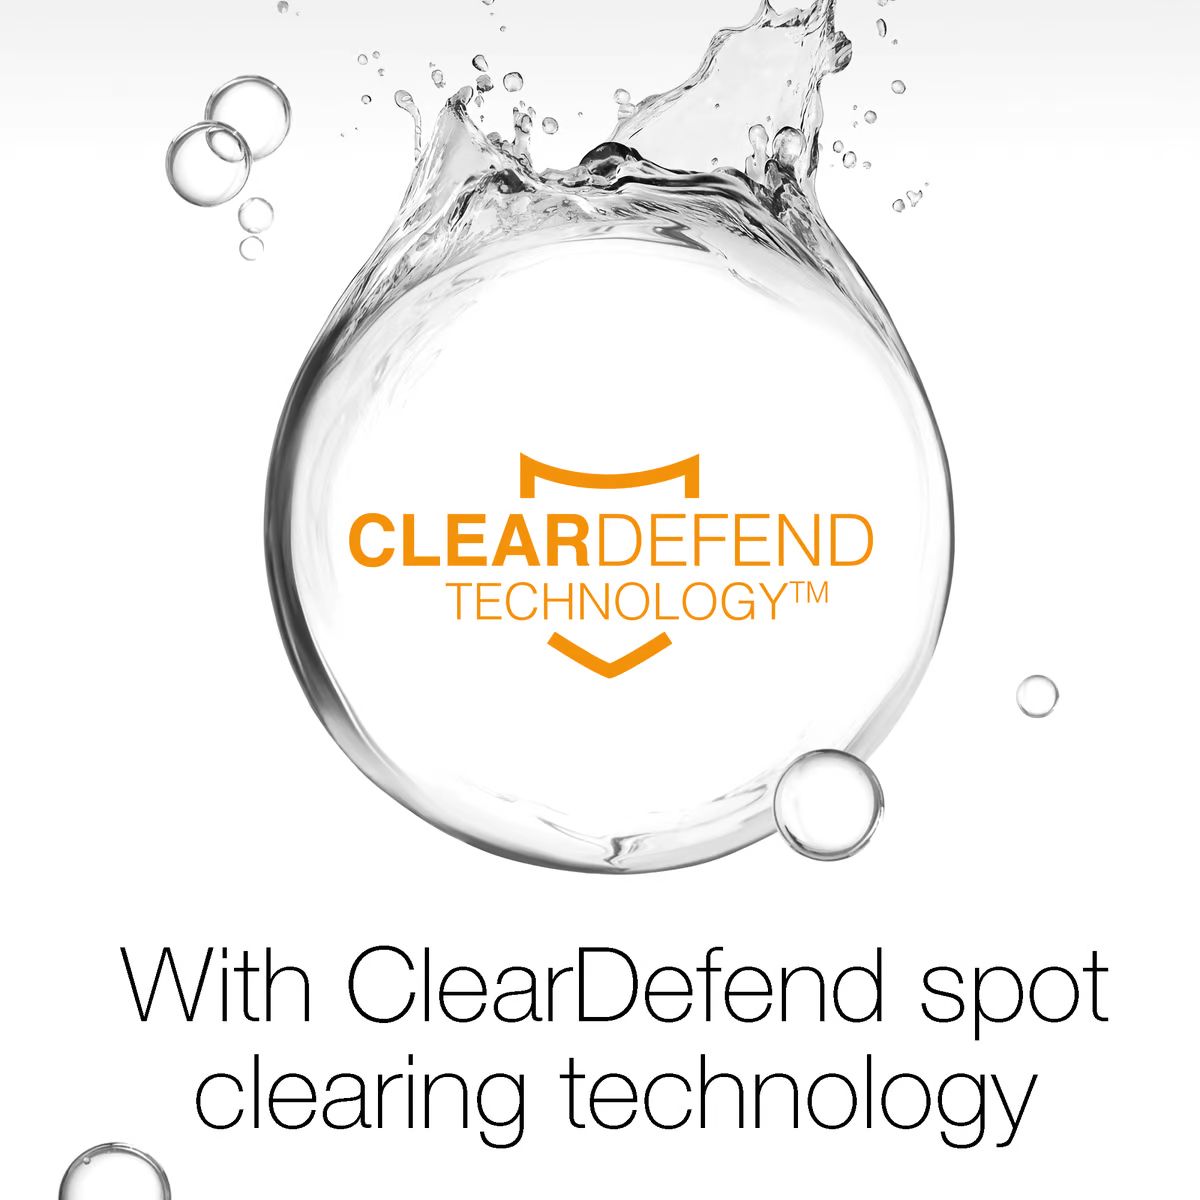 Visibly Clear Clear & Protect Daily Wash Oil Free 200Ml